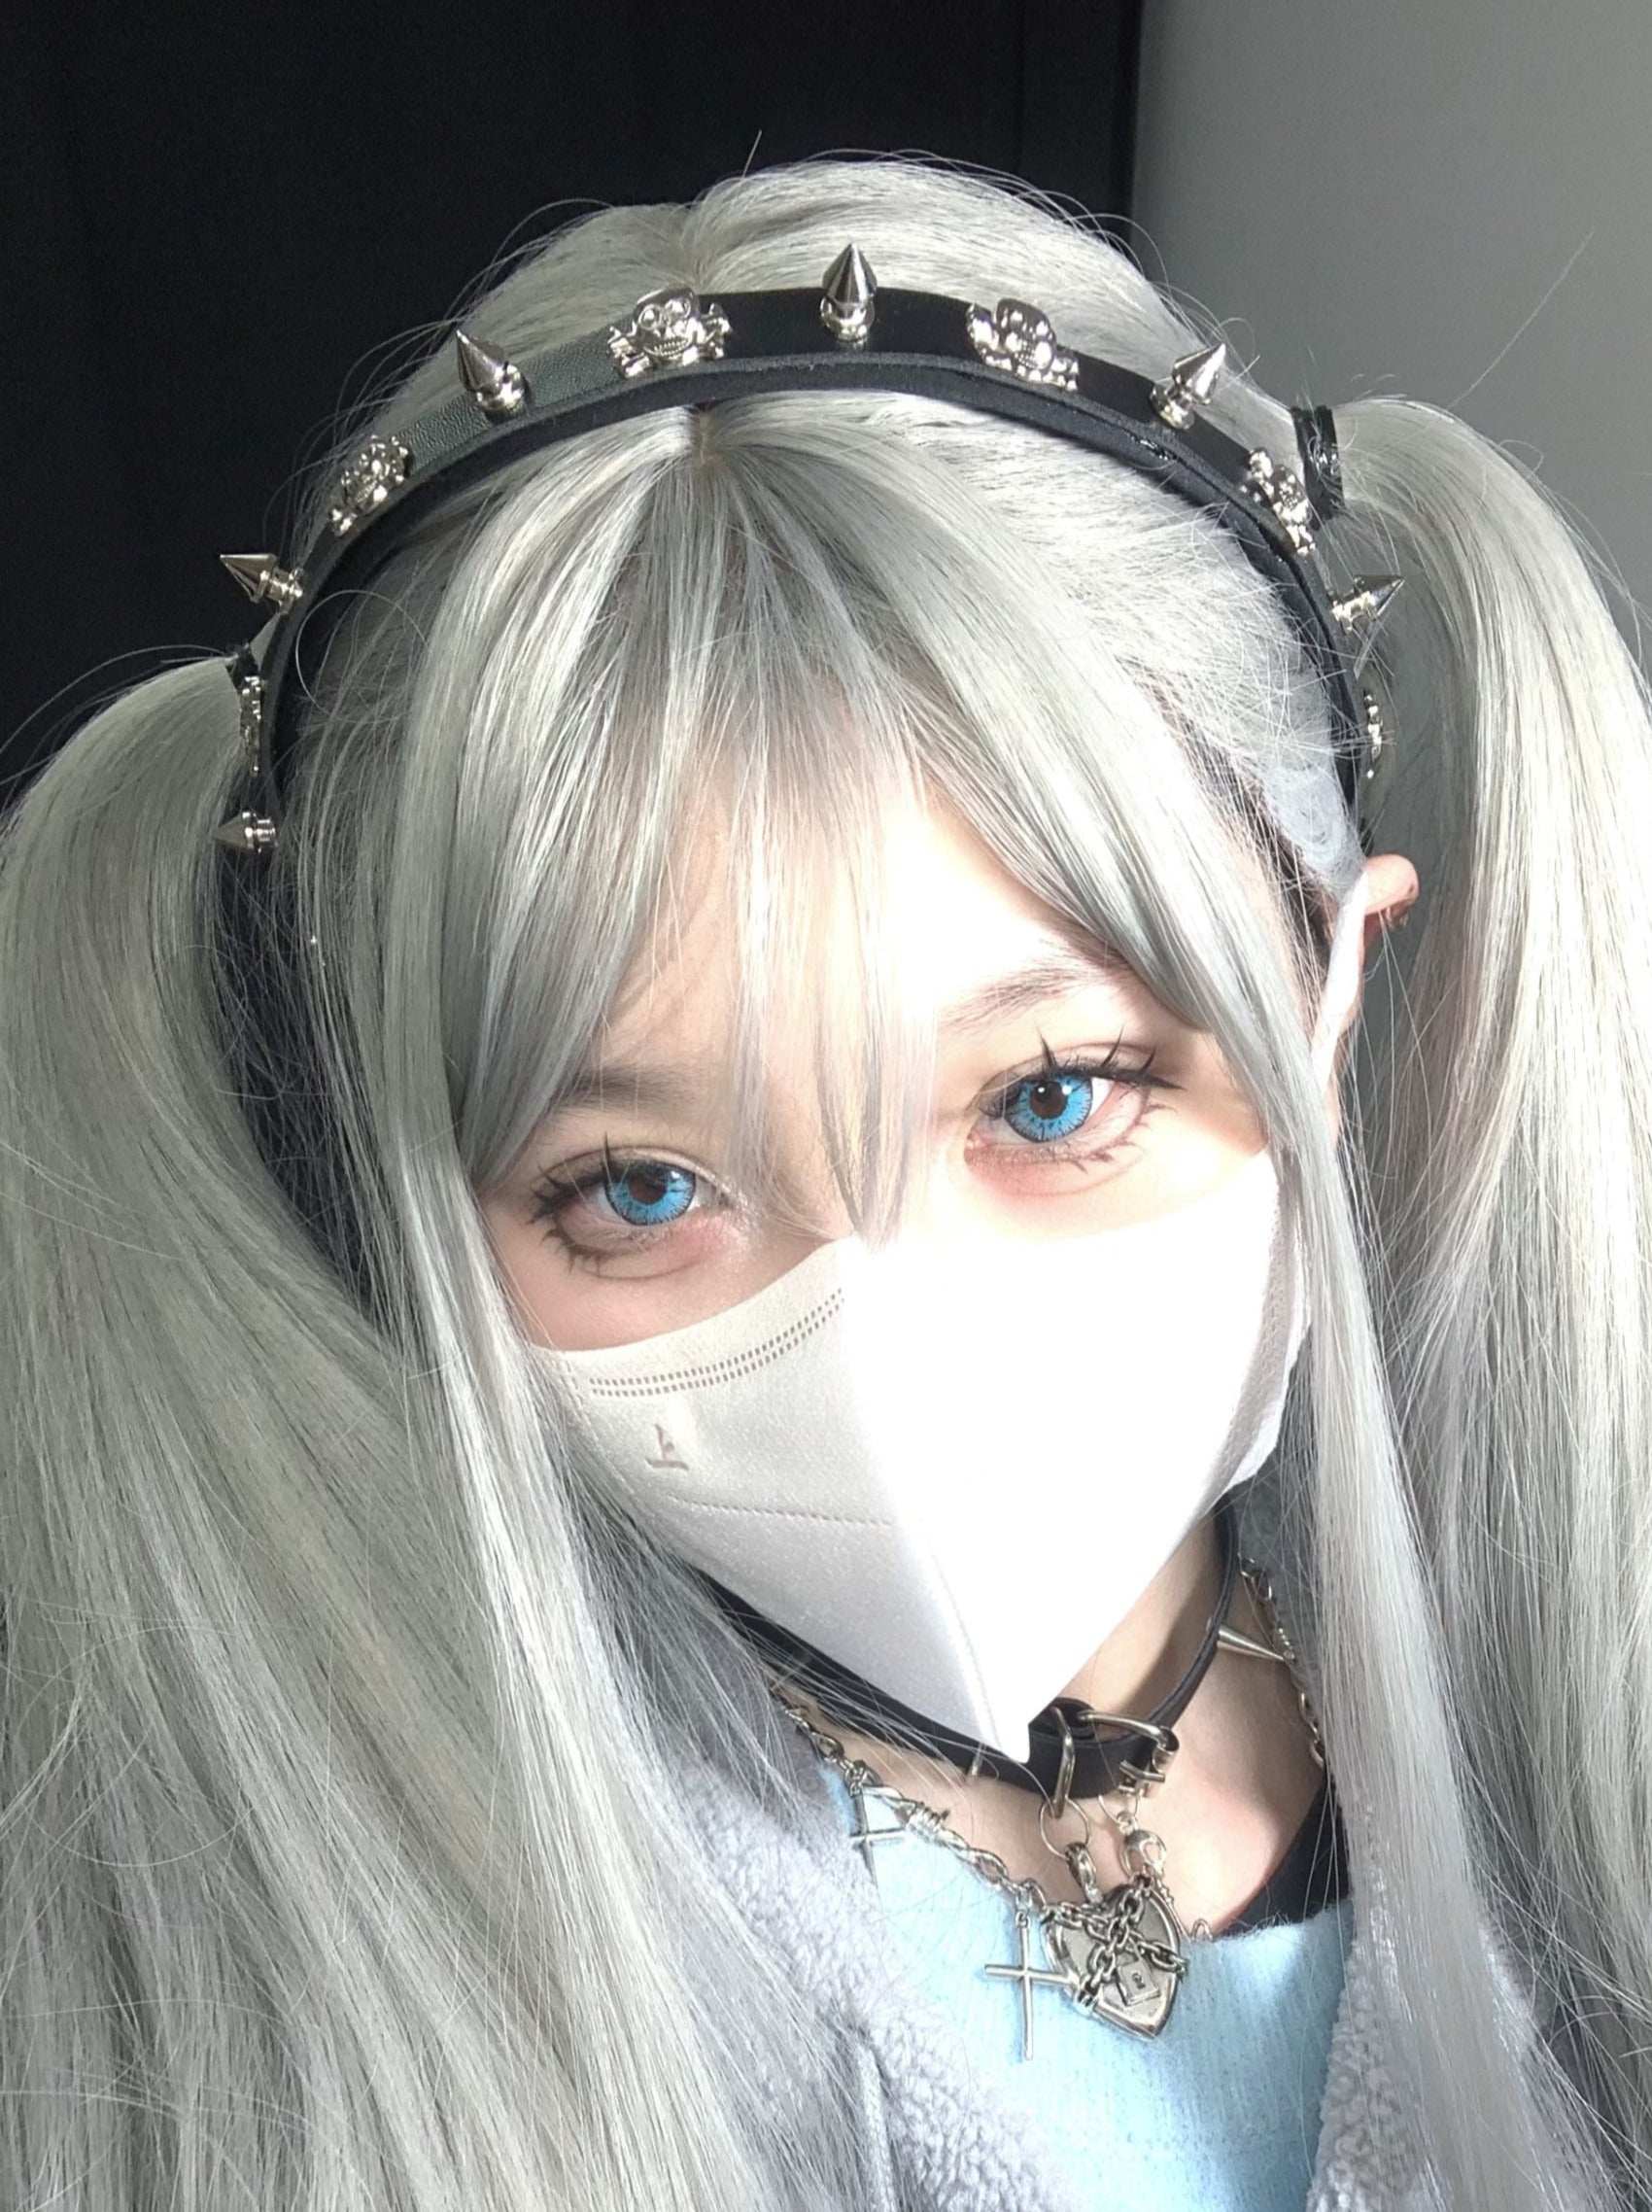 Japanese Boy Masters the Art of Makeup to Become Female Cosplay Goddess